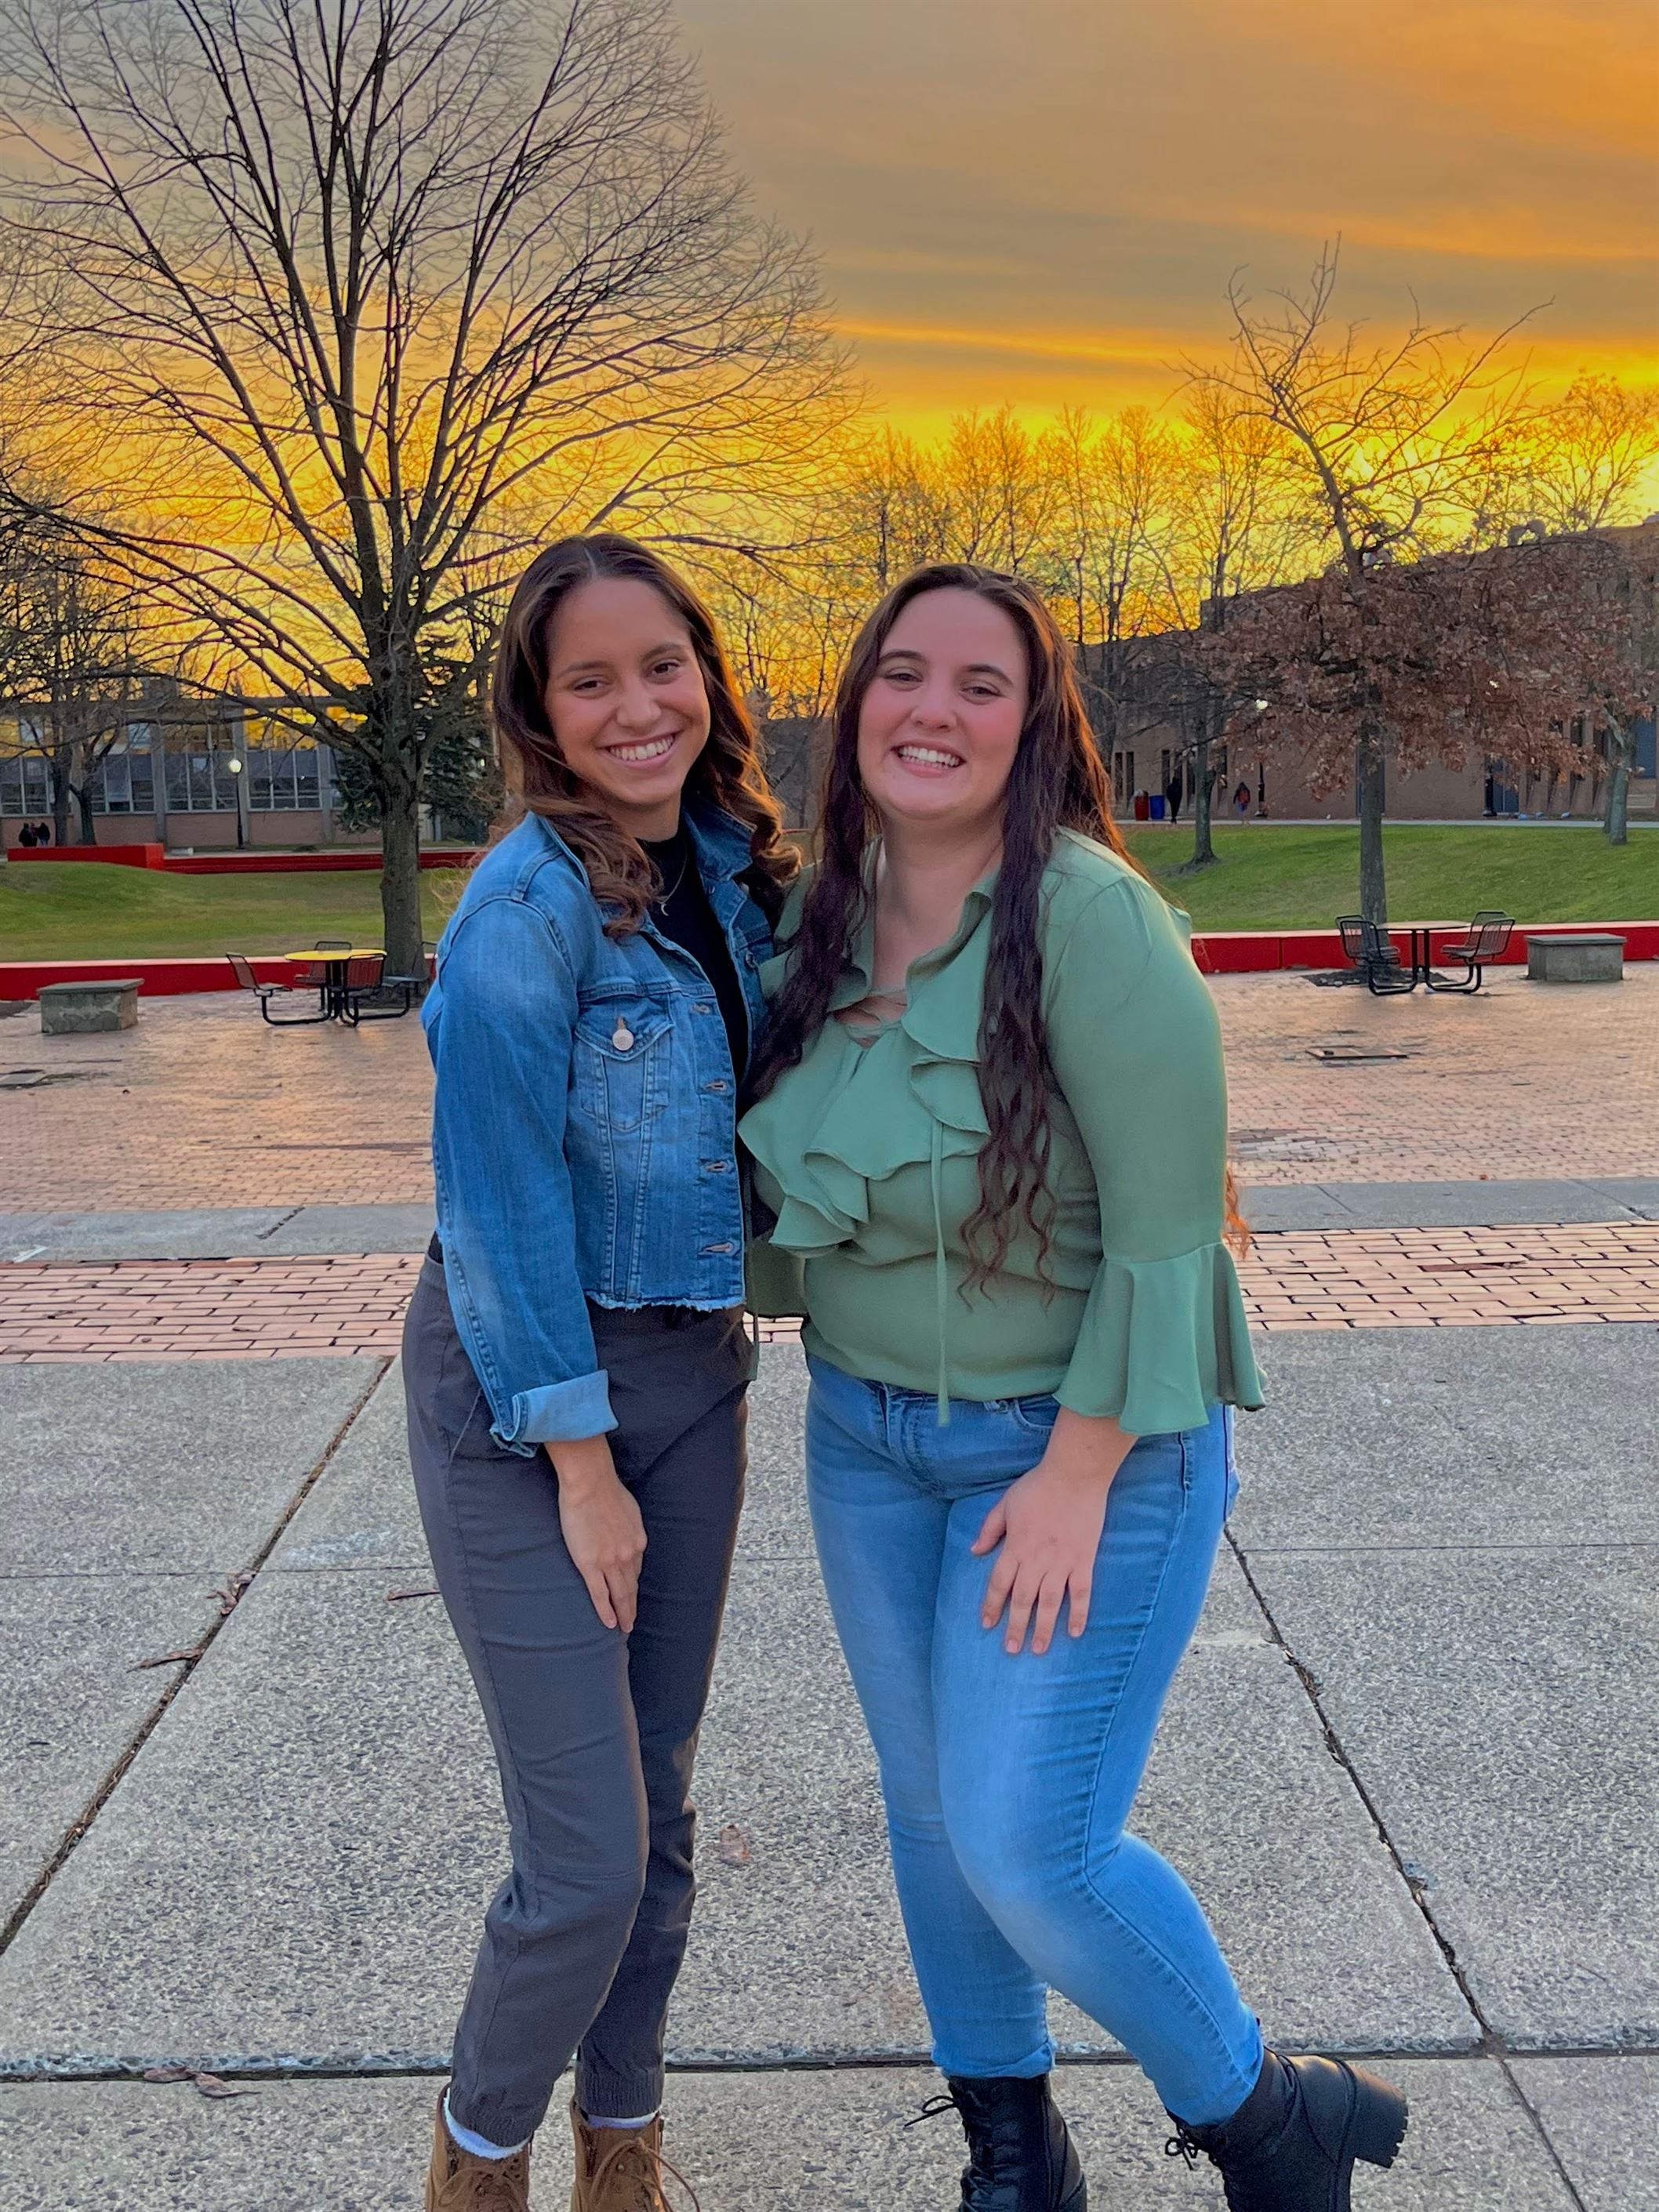 Diana Sisk-Gritz and Tania Dominguez have been roommates since freshman year. Photo courtesy of Tania Dominguez